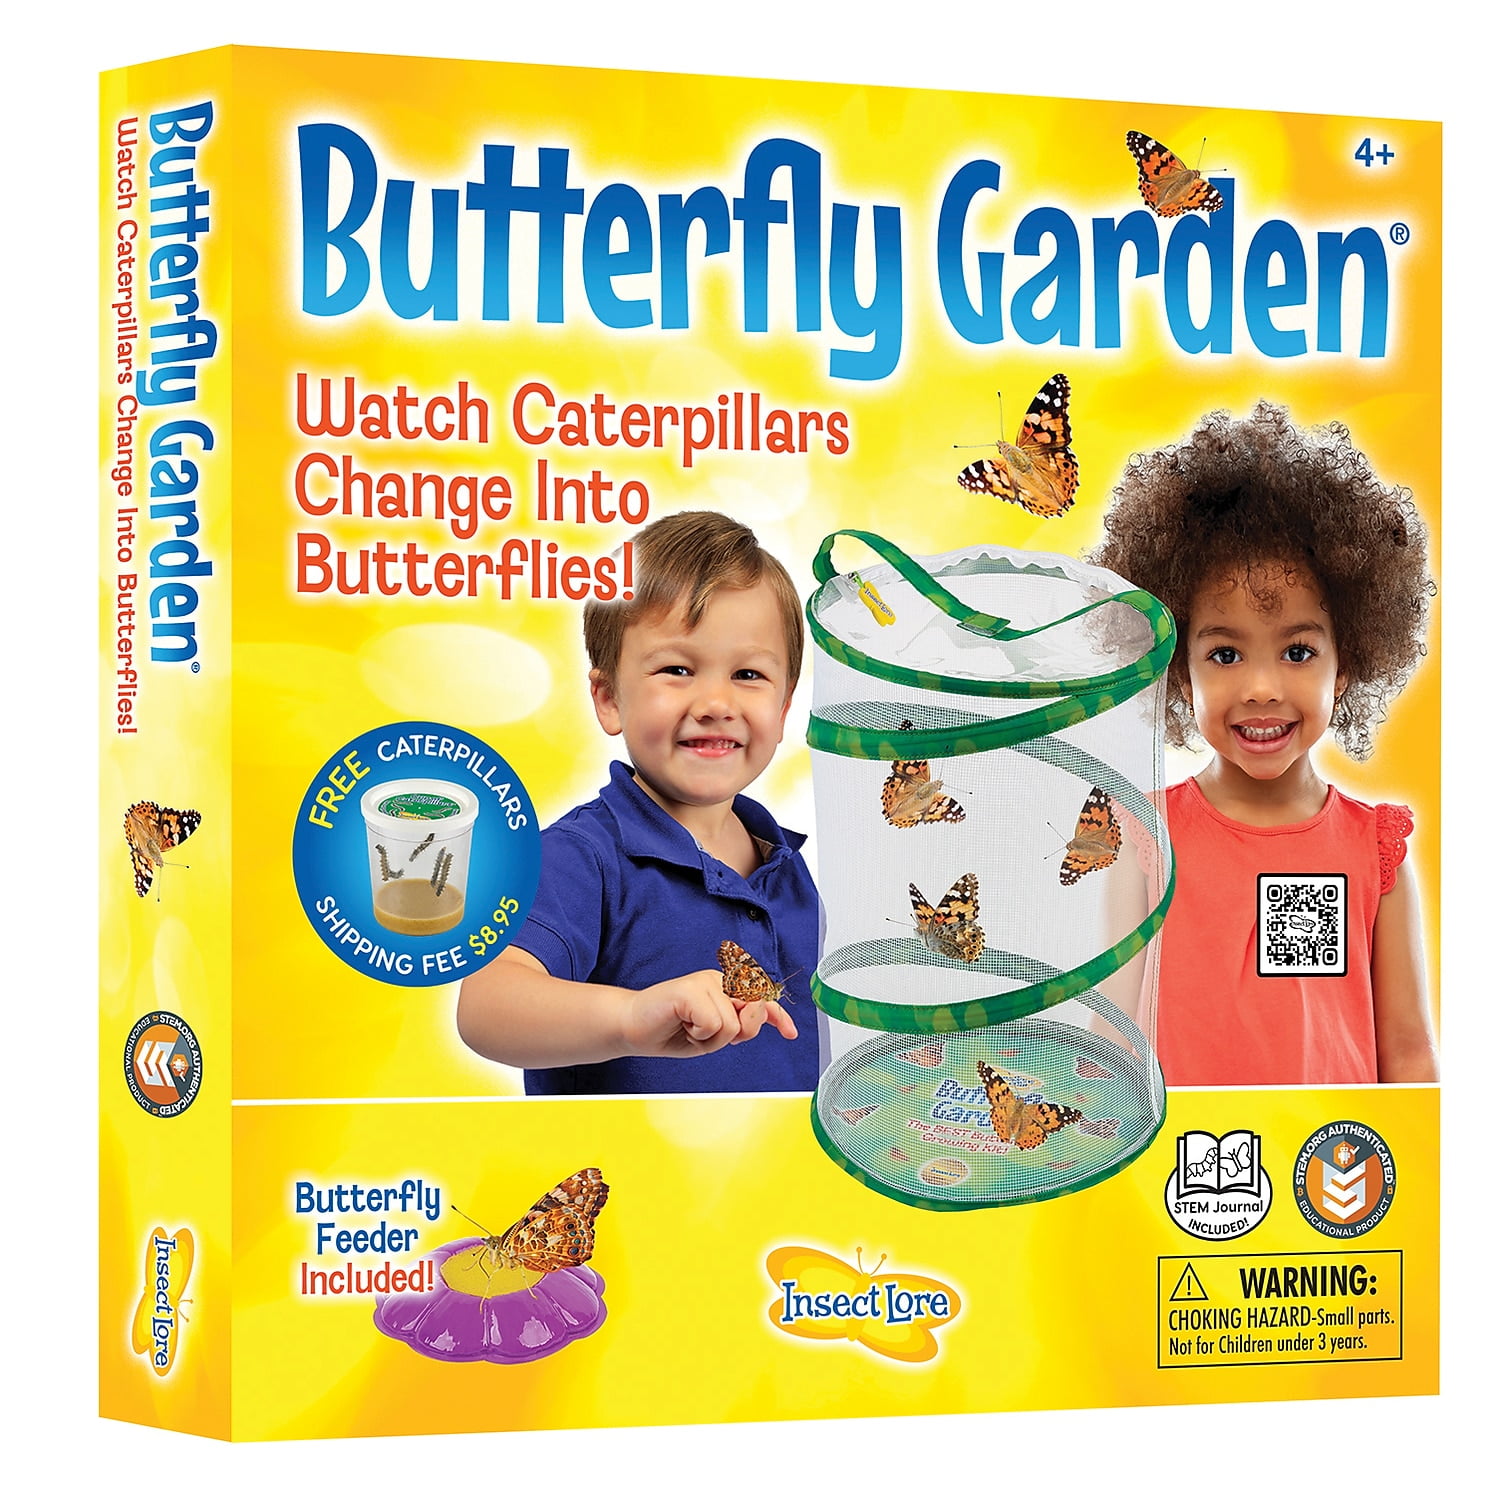 Butterfly Net BOY GIRL GARDEN DISCOVERY BUG TUB INSECT Viewer Magnify Pot 